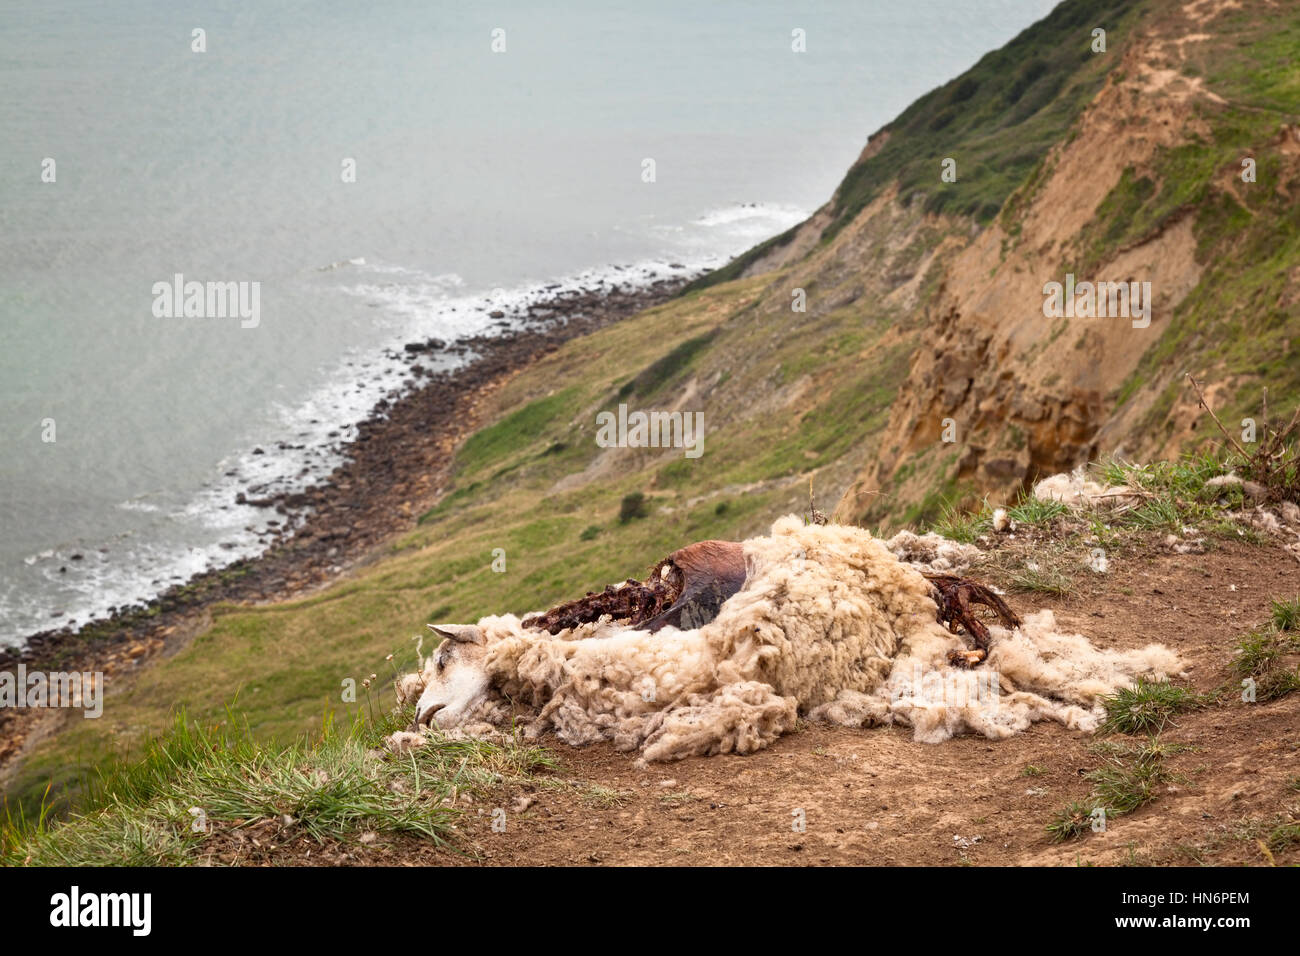 A dead sheep (Ovis aries) laying on a cliff edge on the South West Coast Path in Dorset, England. Stock Photo